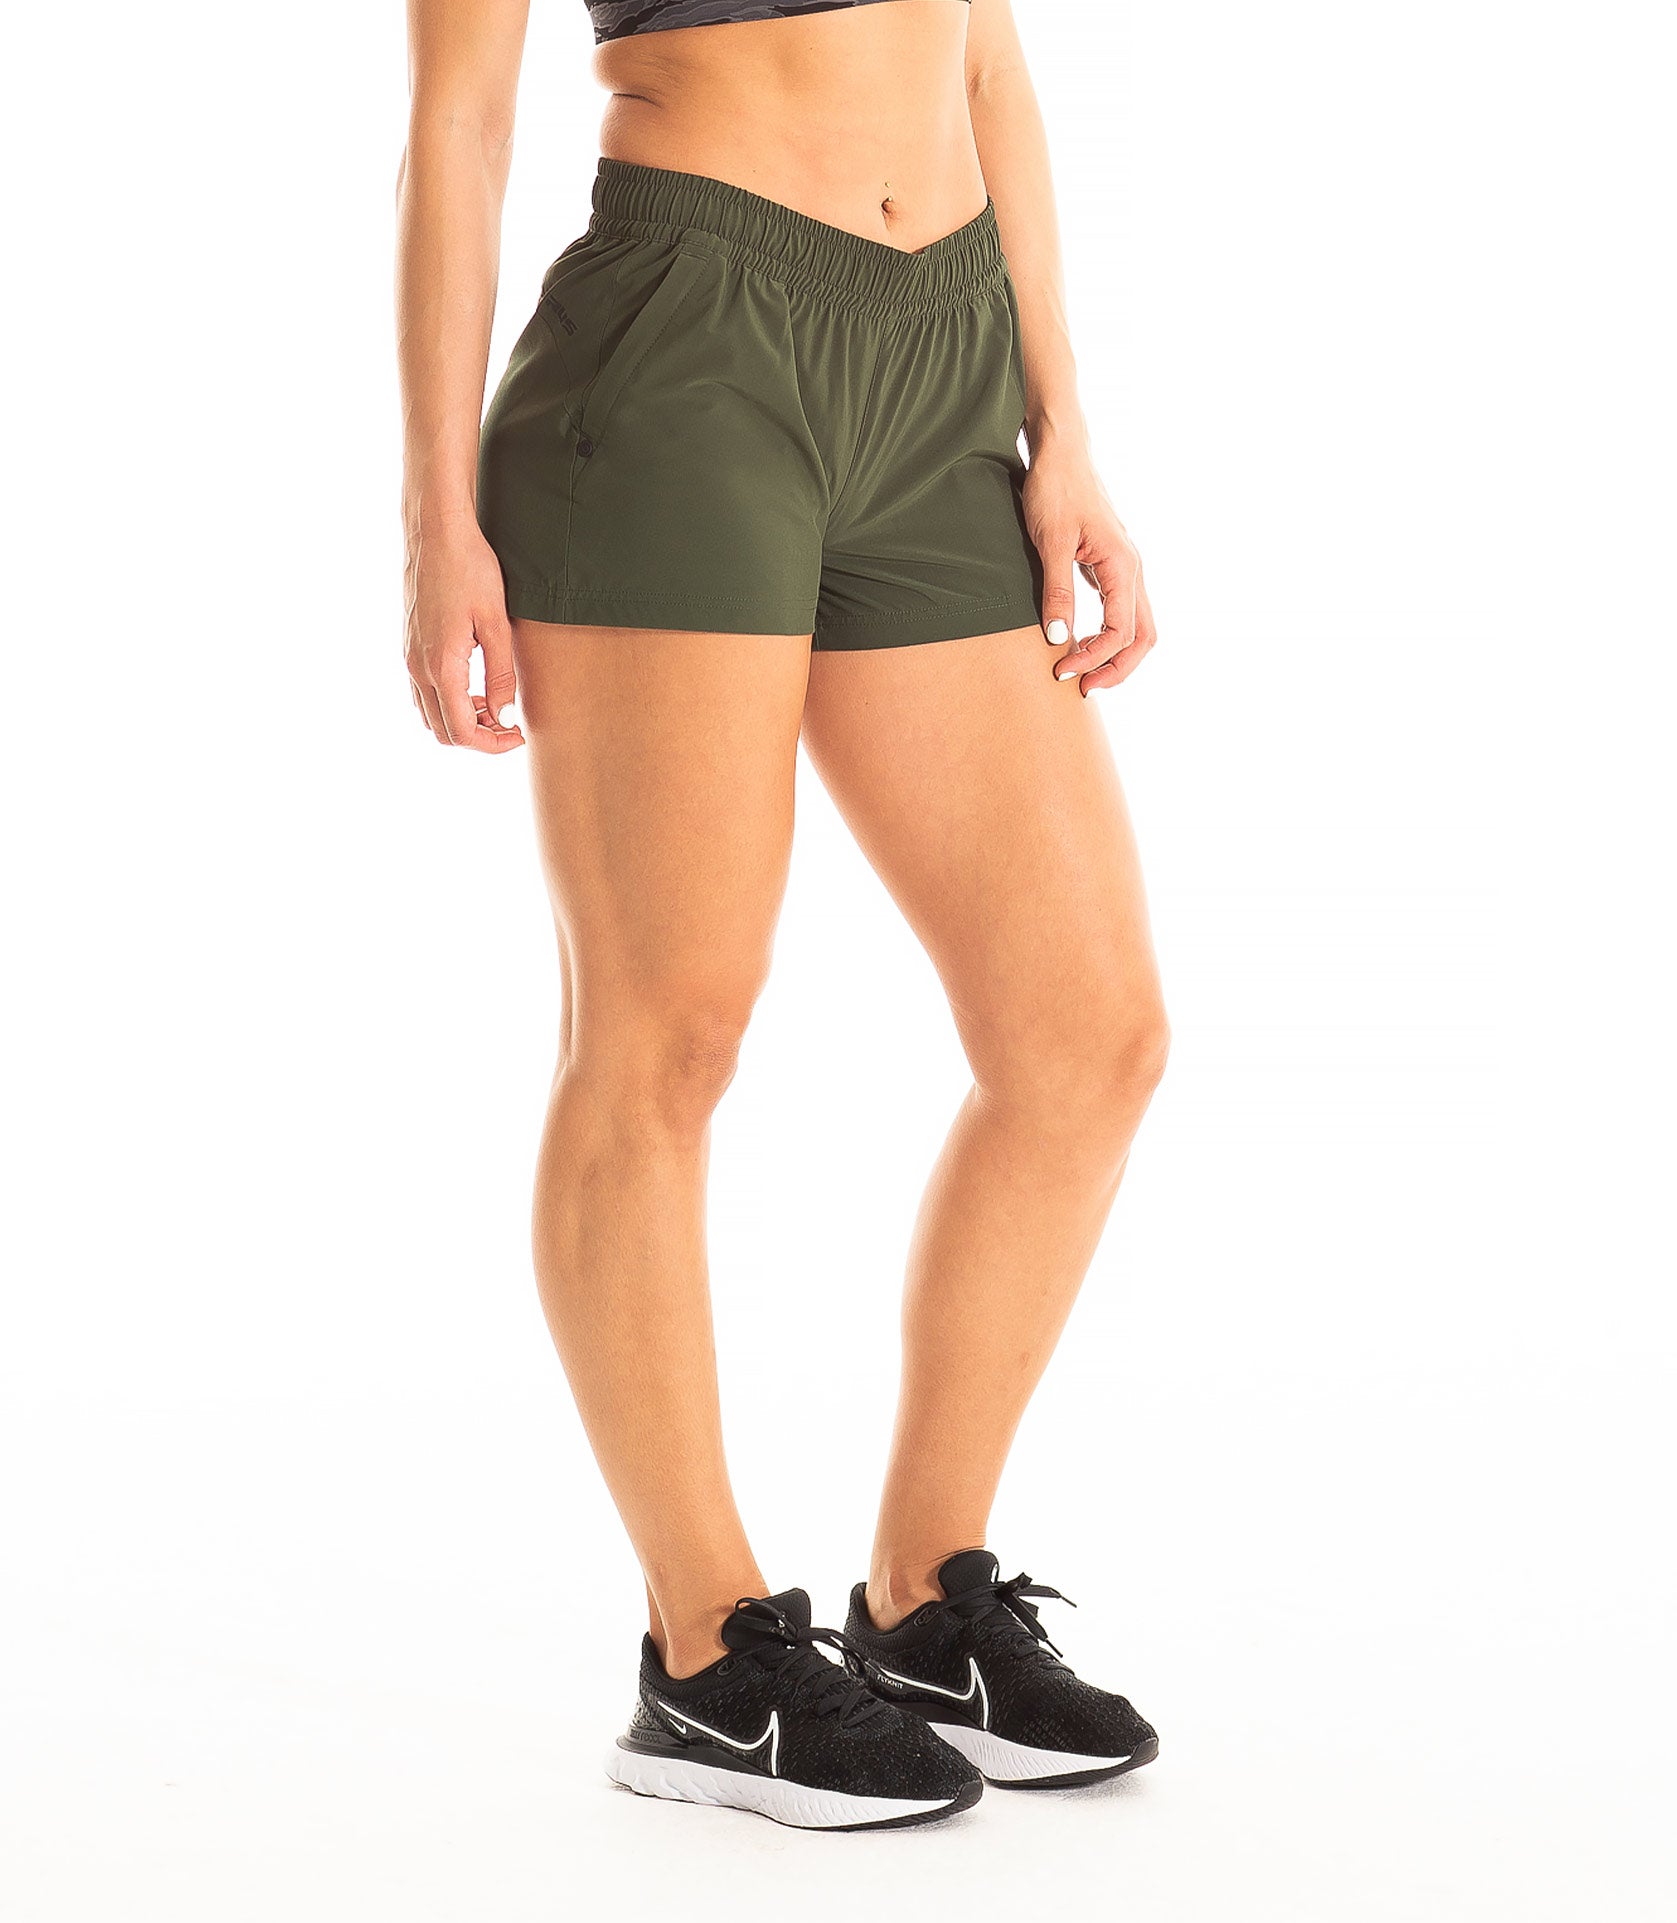 Women's shorts ⇒ Buy the best workout shorts for women